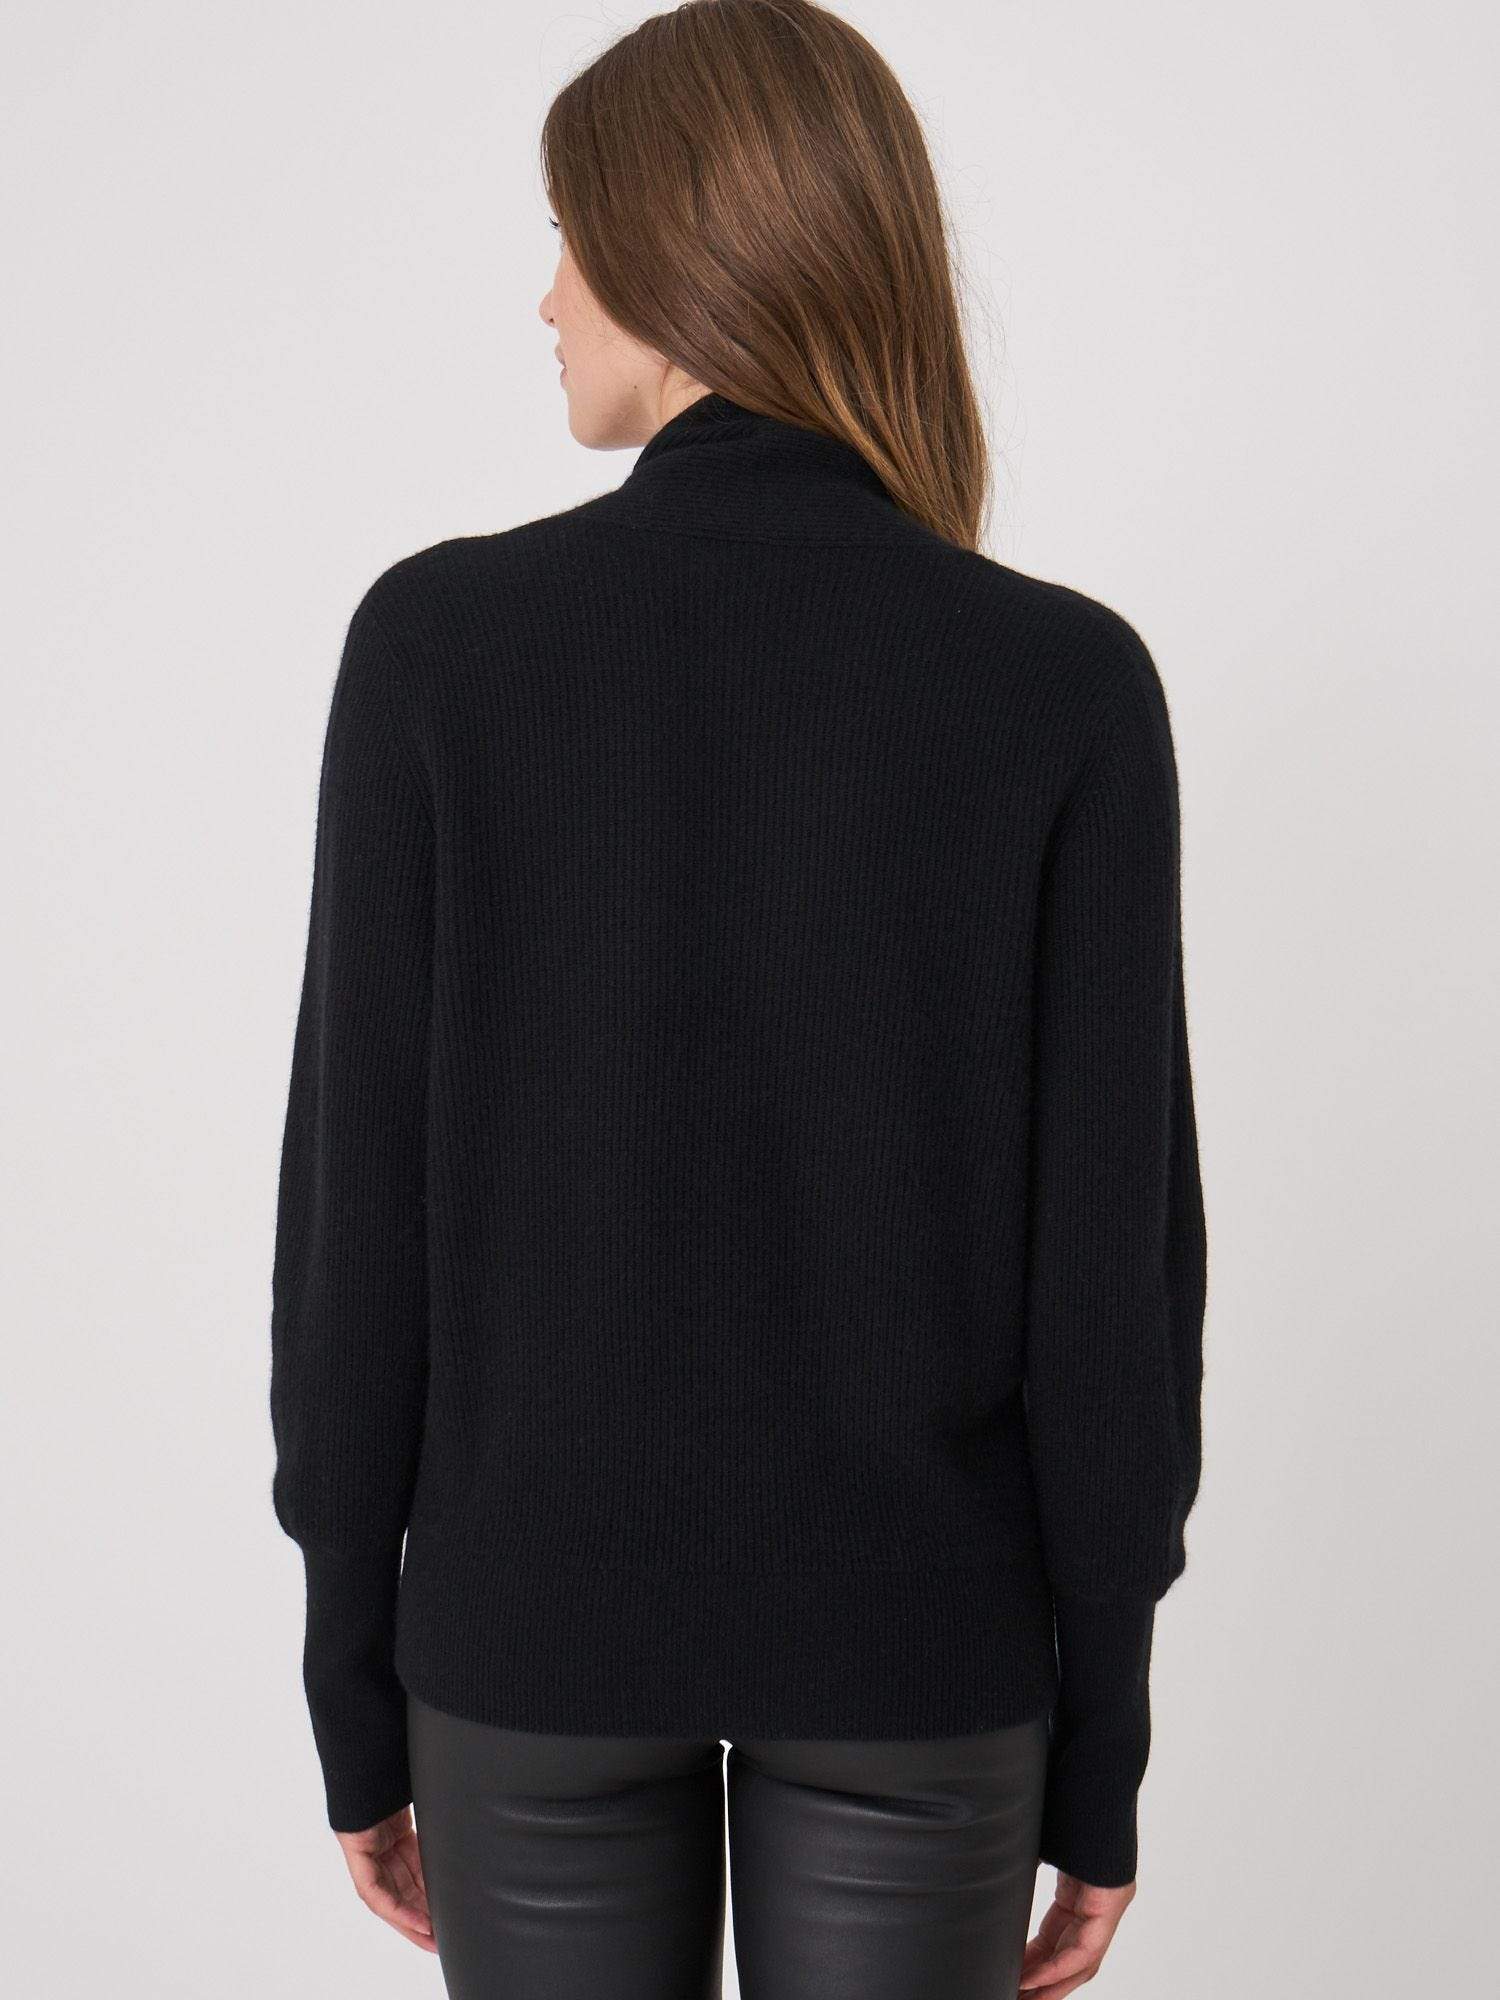 repeat cashmere wrap swetaer in black back view